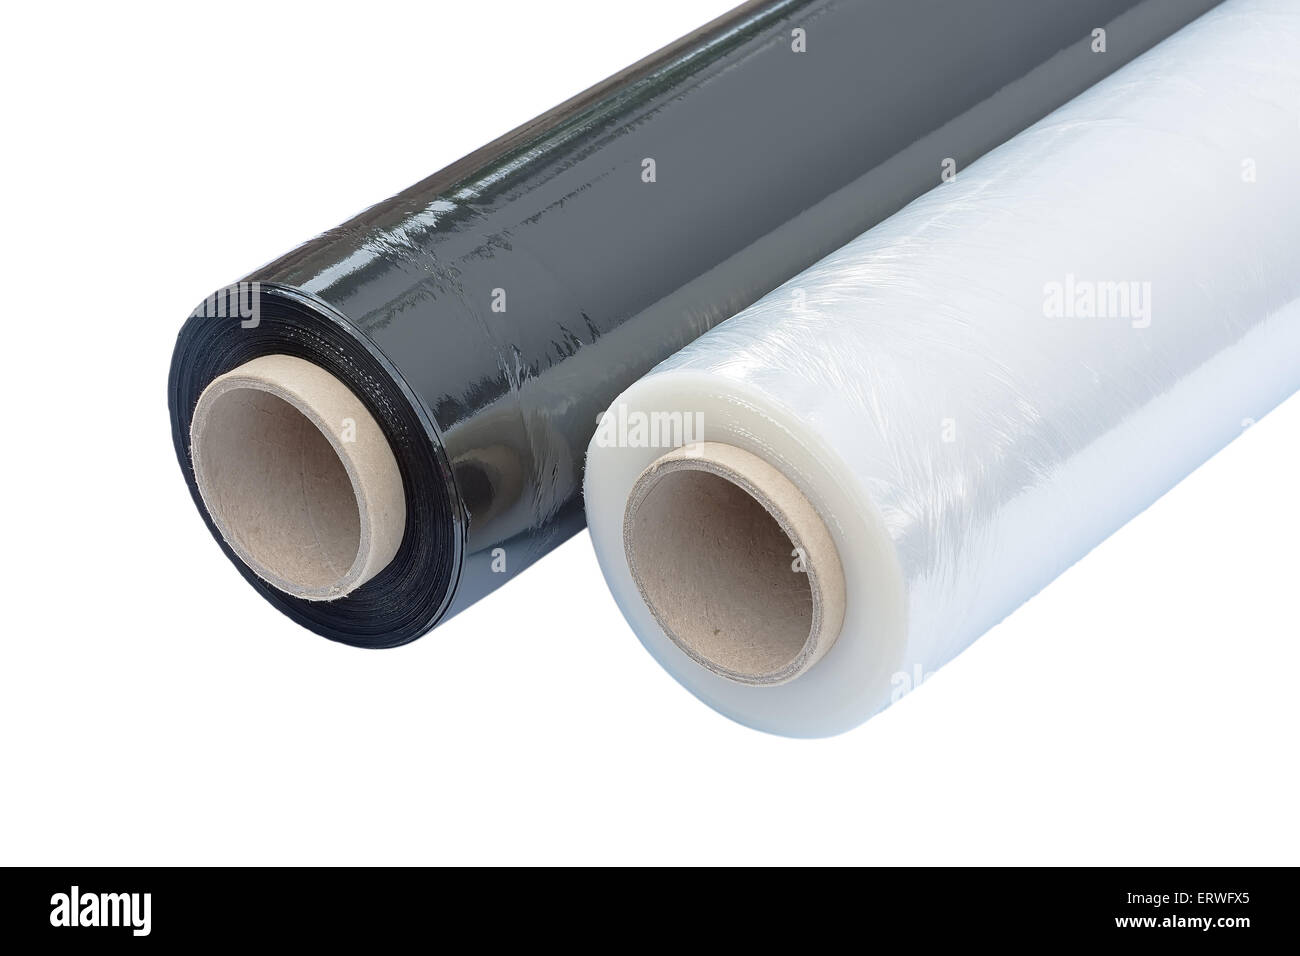 https://c8.alamy.com/comp/ERWFX5/two-rolls-of-stretch-film-packaging-black-and-transparent-wrapping-ERWFX5.jpg